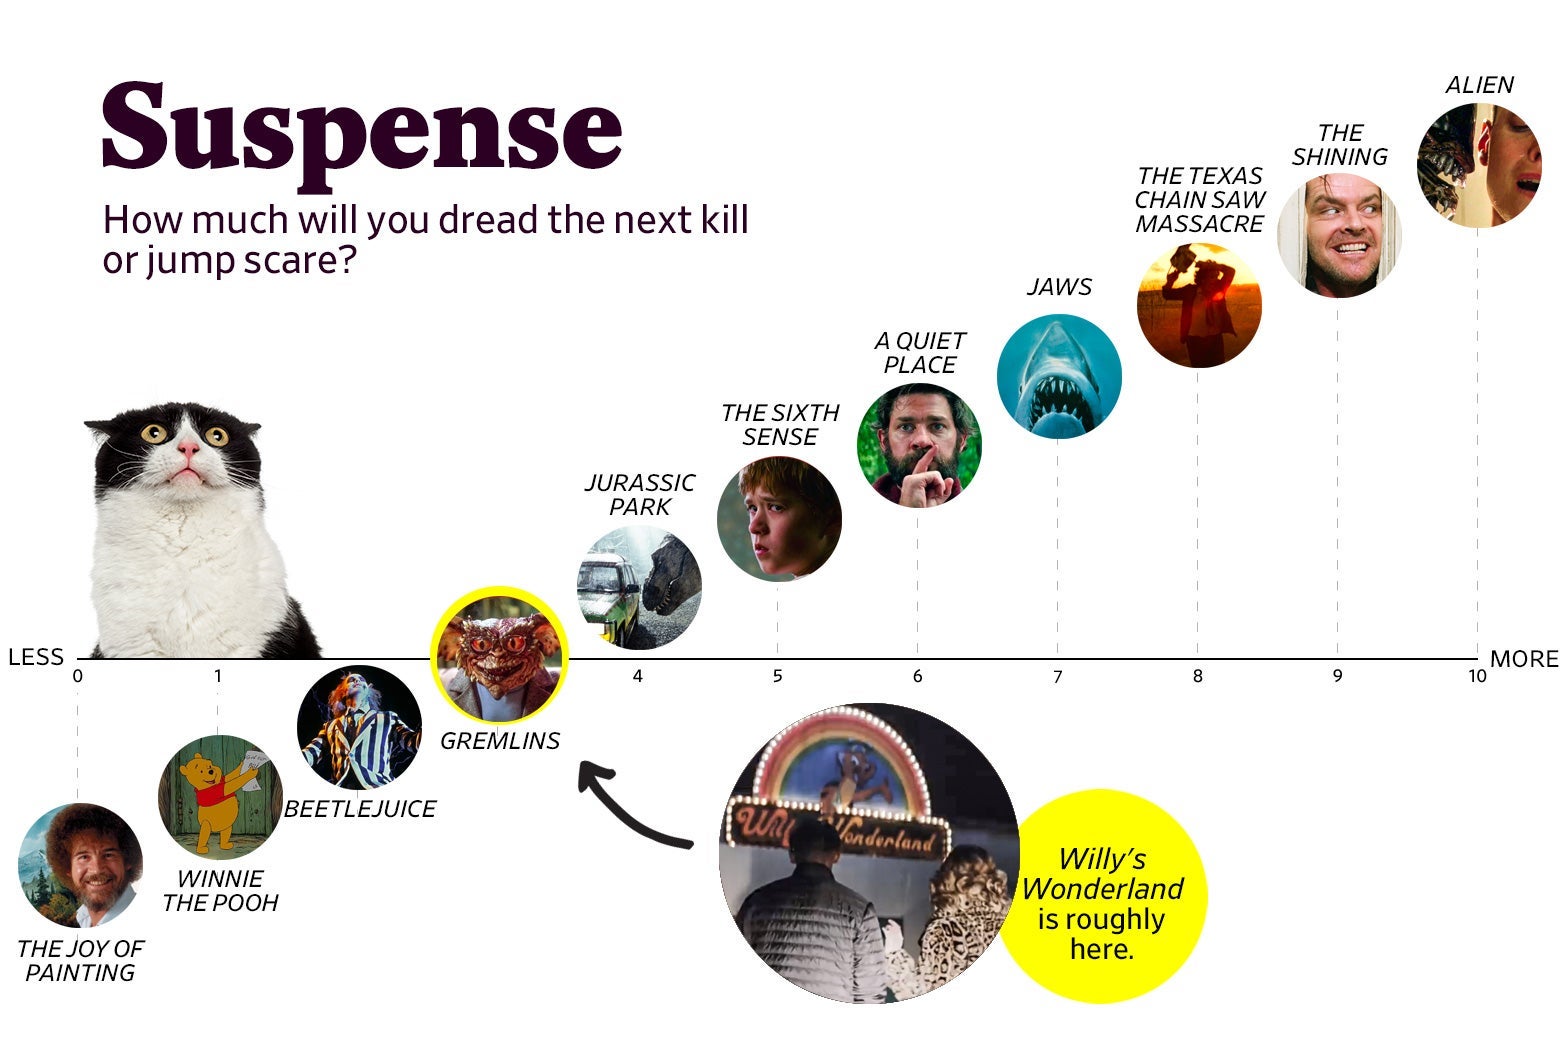 A chart titled “Suspense: How much will you dread the next kill or jump scare?” shows that Willy’s Wonderland ranks a 3 in suspense, roughly the same as Gremlins. The scale ranges from The Joy of Painting (0) to Alien (10).